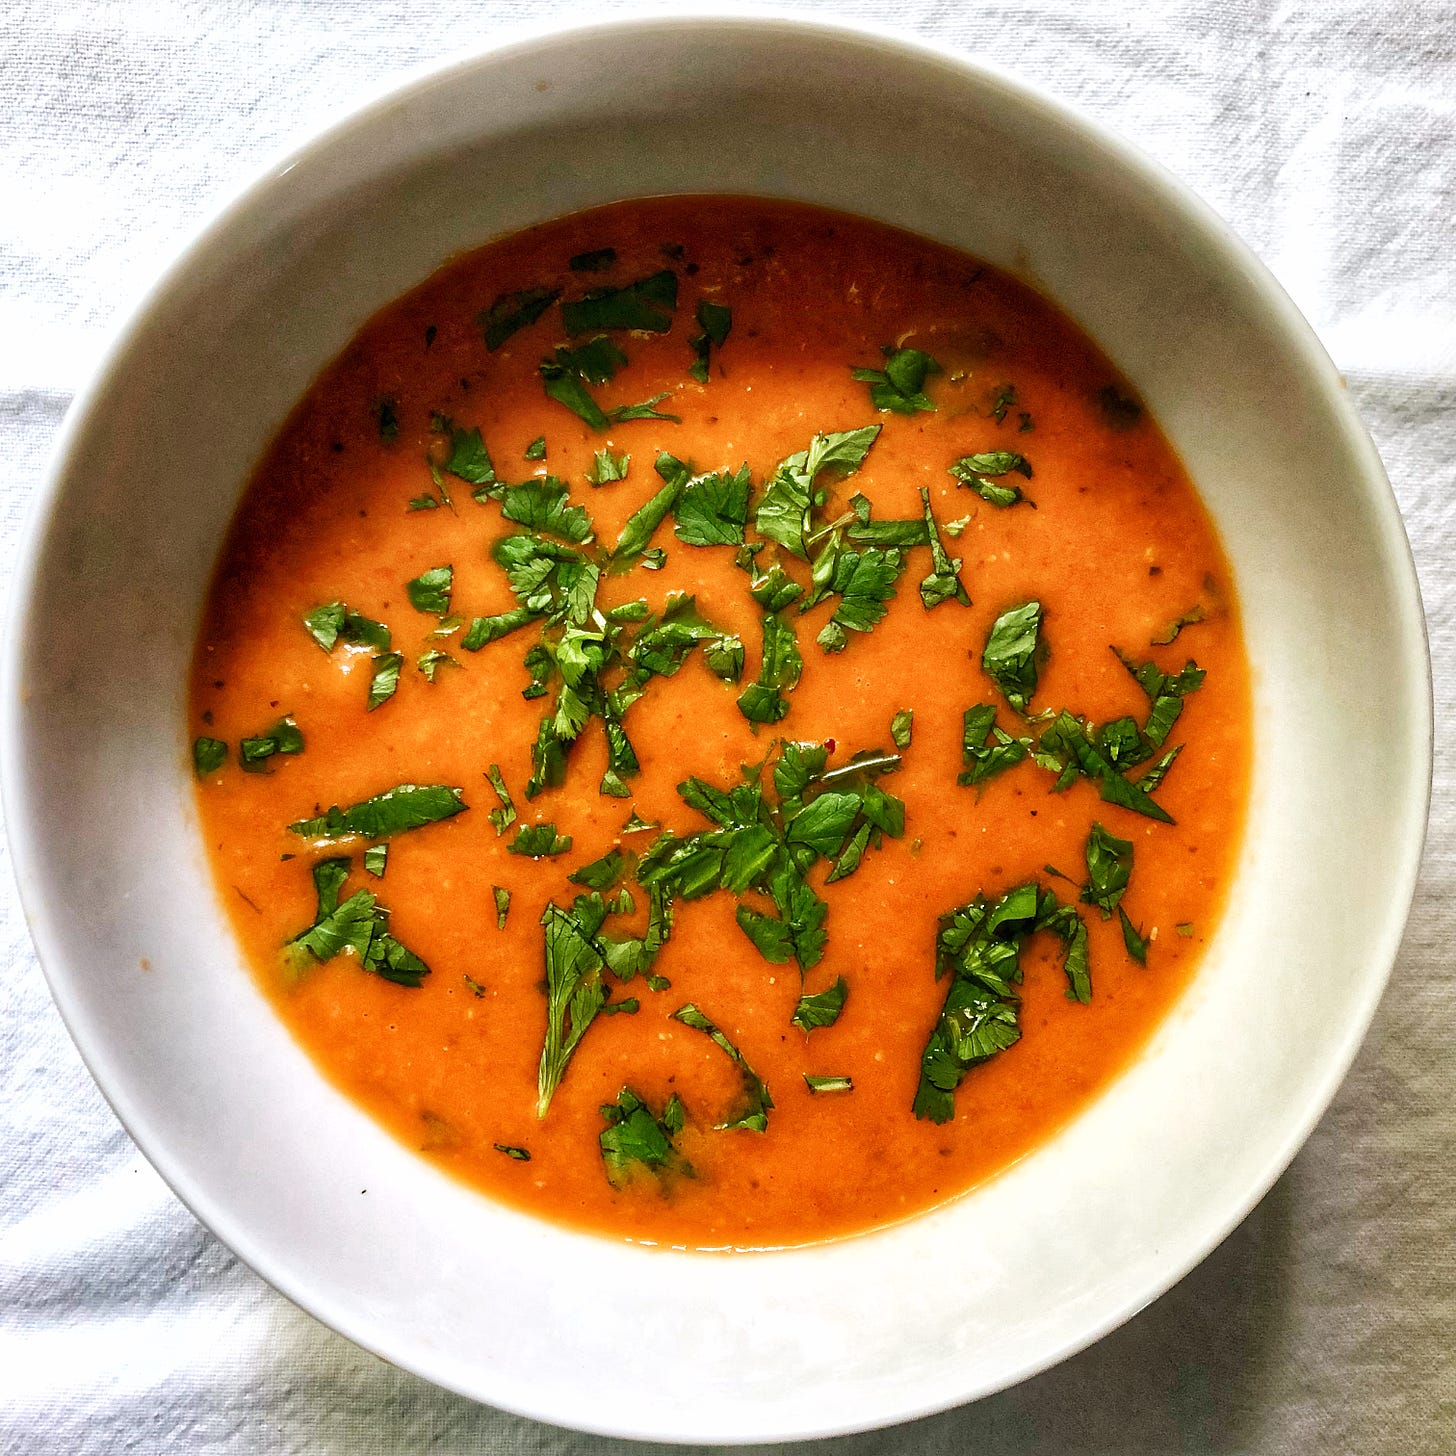 Tomato soup with cilantro sprinkled on the surface. The soup is in a white bowl, which is placed on a white fabric background.